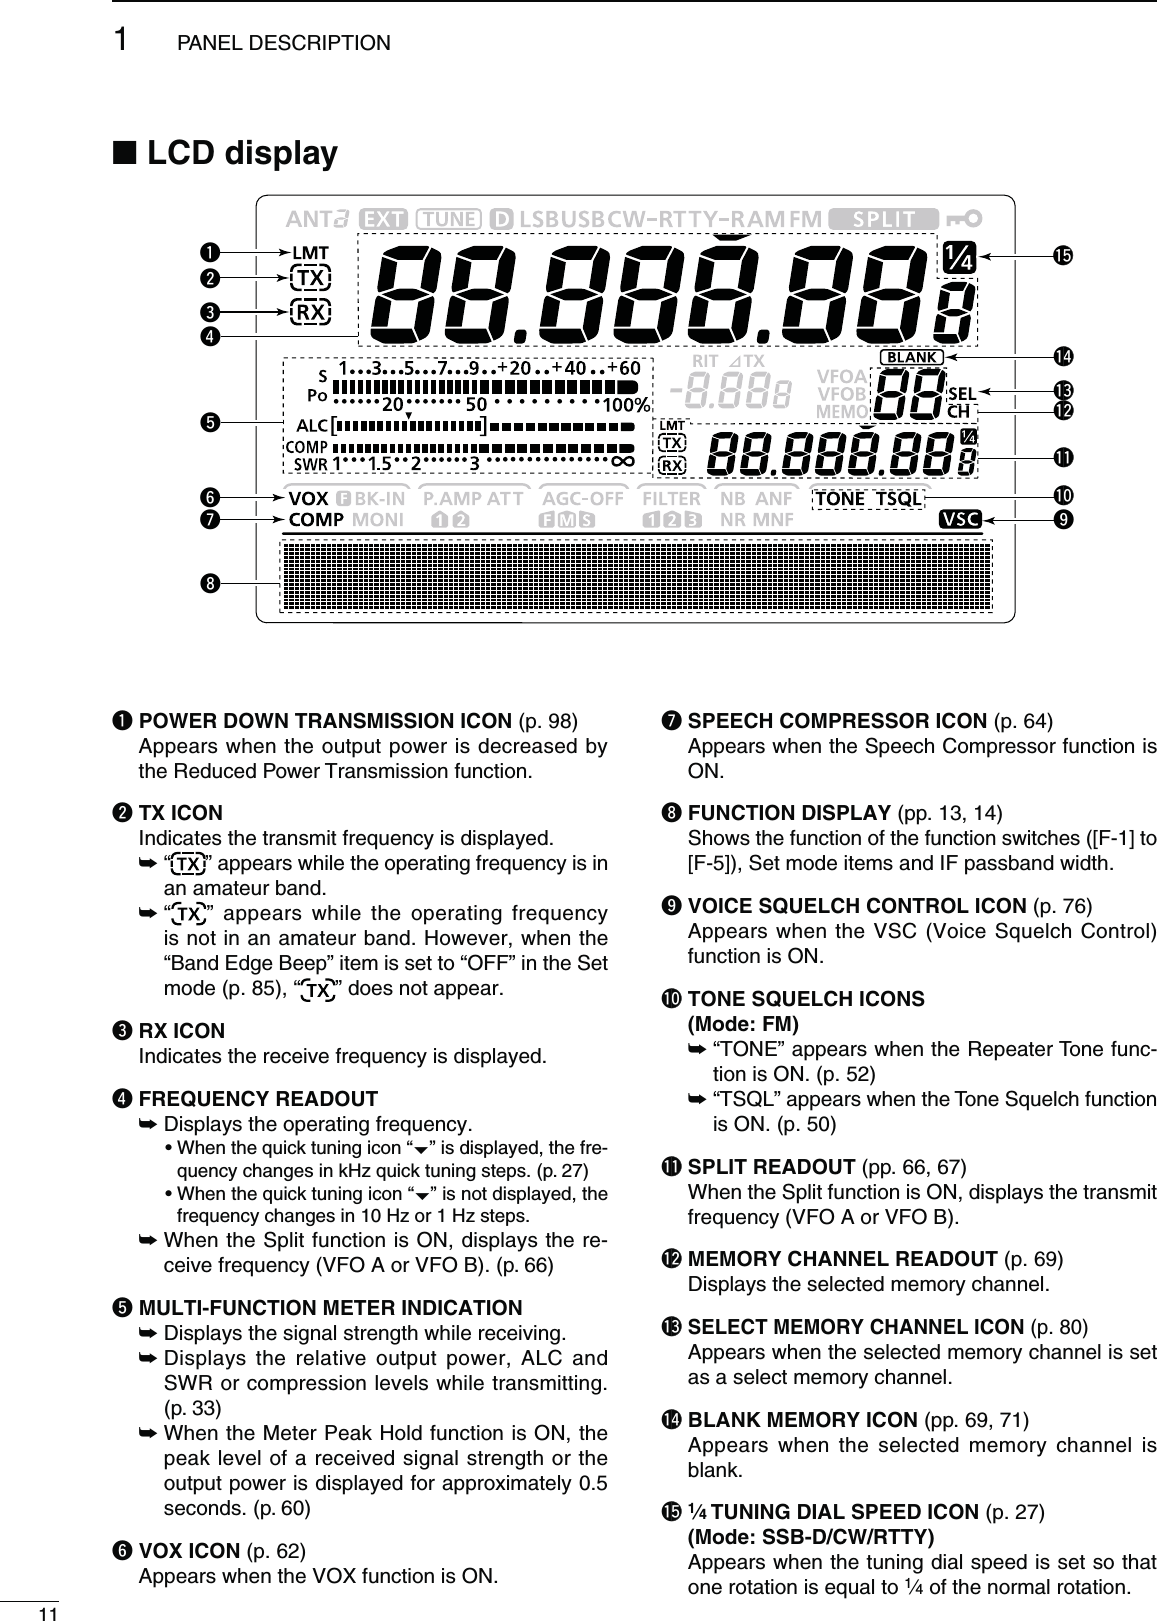 111PANEL DESCRIPTIONN,#$DISPLAYq POWER DOWN TRANSMISSION ICON (p. 98)  Appears when the output power is decreased by  the Reduced Power Transmission function.w TX ICON  Indicates the transmit frequency is displayed. ±“” appears while the operating frequency is in an amateur band.  ±“” appears while the operating frequency is not in an amateur band. However, when the “Band Edge Beep” item is set to “OFF” in the Set mode (p. 85), “ ” does not appear.e RX ICON  Indicates the receive frequency is displayed.r  FREQUENCY READOUT ±Displays the operating frequency.  s7HENTHEQUICKTUNINGICONh” is displayed, the fre-quency changes in kHz quick tuning steps. (p. 27)  s7HENTHEQUICKTUNINGICONh” is not displayed, the frequency changes in 10 Hz or 1 Hz steps. ±When the Split function is ON, displays the re-ceive frequency (VFO A or VFO B). (p. 66)t MULTI-FUNCTION METER INDICATION ±Displays the signal strength while receiving. ±Displays the relative output power, ALC and SWR or compression levels while transmitting. (p. 33) ±When the Meter Peak Hold function is ON, the peak level of a received signal strength or the output power is displayed for approximately 0.5 seconds. (p. 60)y VOX ICON (p. 62)  Appears when the VOX function is ON.u  SPEECH COMPRESSOR ICON (p. 64)  Appears when the Speech Compressor function is ON.i FUNCTION DISPLAY (pp. 13, 14)  Shows the function of the function switches ([F-1] to [F-5]), Set mode items and IF passband width.o VOICE SQUELCH CONTROL ICON (p. 76)  Appears when the VSC (Voice Squelch Control) function is ON.!0 TONE SQUELCH ICONS -ODE&amp;- ±“TONE” appears when the Repeater Tone func-tion is ON. (p. 52) ±“TSQL” appears when the Tone Squelch function is ON. (p. 50)!1 SPLIT READOUT (pp. 66, 67)  When the Split function is ON, displays the transmit frequency (VFO A or VFO B).!2 MEMORY CHANNEL READOUT (p. 69)   Displays the selected memory channel.!3 SELECT MEMORY CHANNEL ICON (p. 80)  Appears when the selected memory channel is set as a select memory channel.!4&quot;,!.+-%-/29)#/.(pp. 69, 71)  Appears when the selected memory channel is blank.!5 1⁄4 TUNING DIAL SPEED ICON (p. 27) -ODE33&quot;$#72449  Appears when the tuning dial speed is set so that one rotation is equal to 1⁄4 of the normal rotation.rtiyqweuo!3!4!0!1!2!5